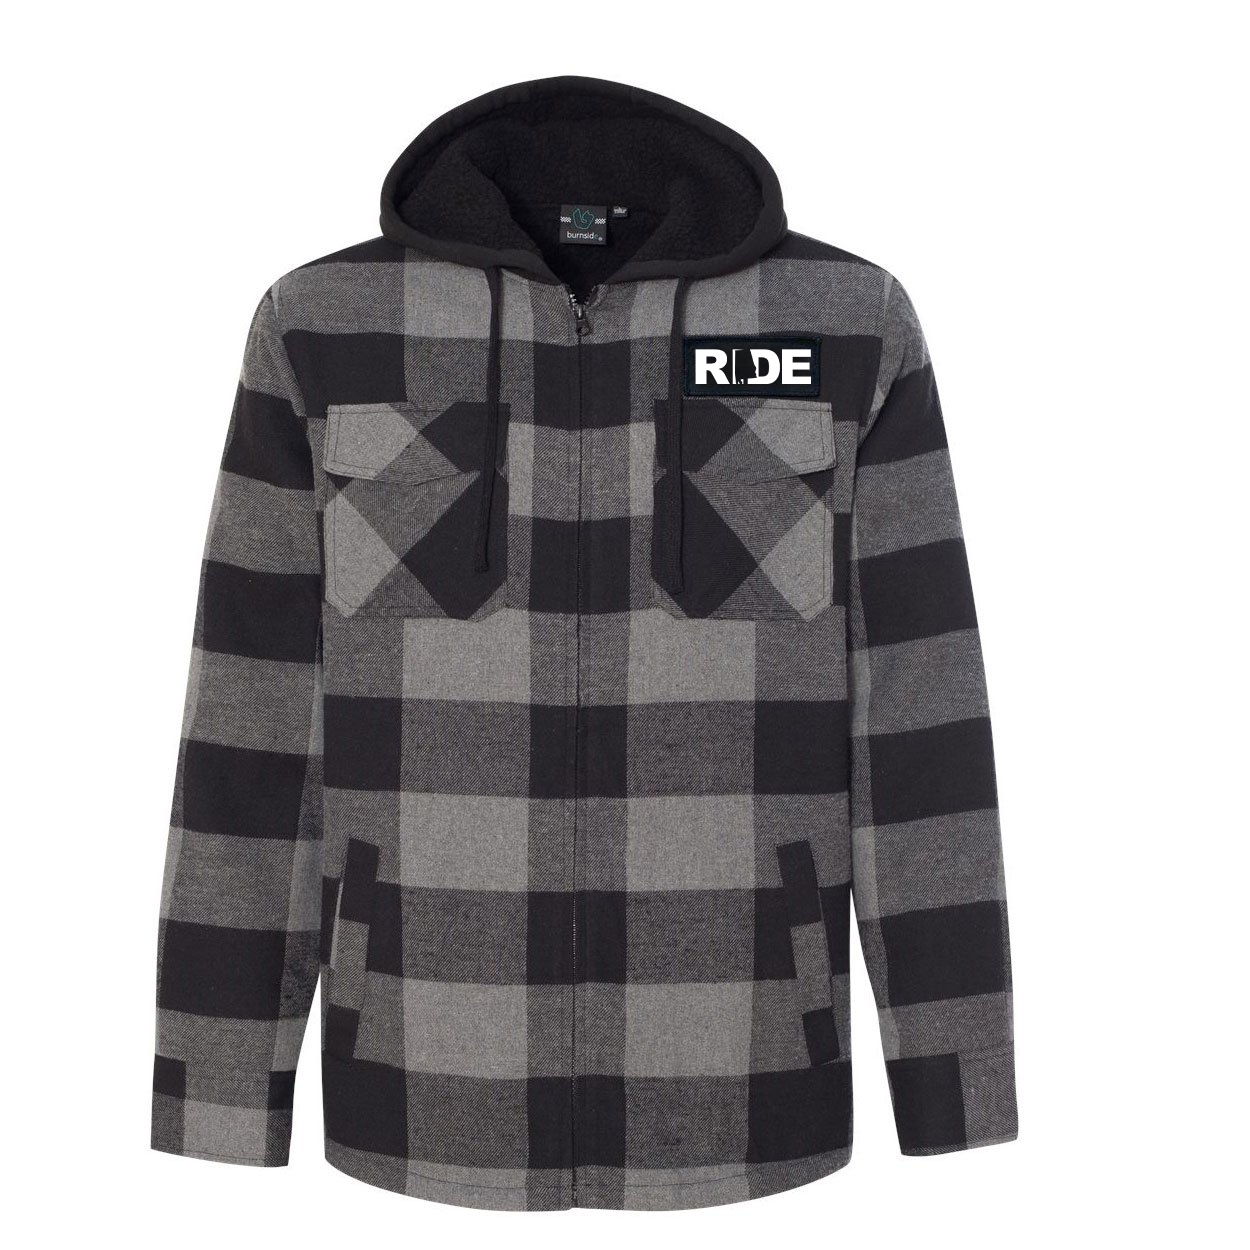 Ride Alabama Classic Unisex Full Zip Woven Patch Hooded Flannel Jacket Black/Gray (White Logo)